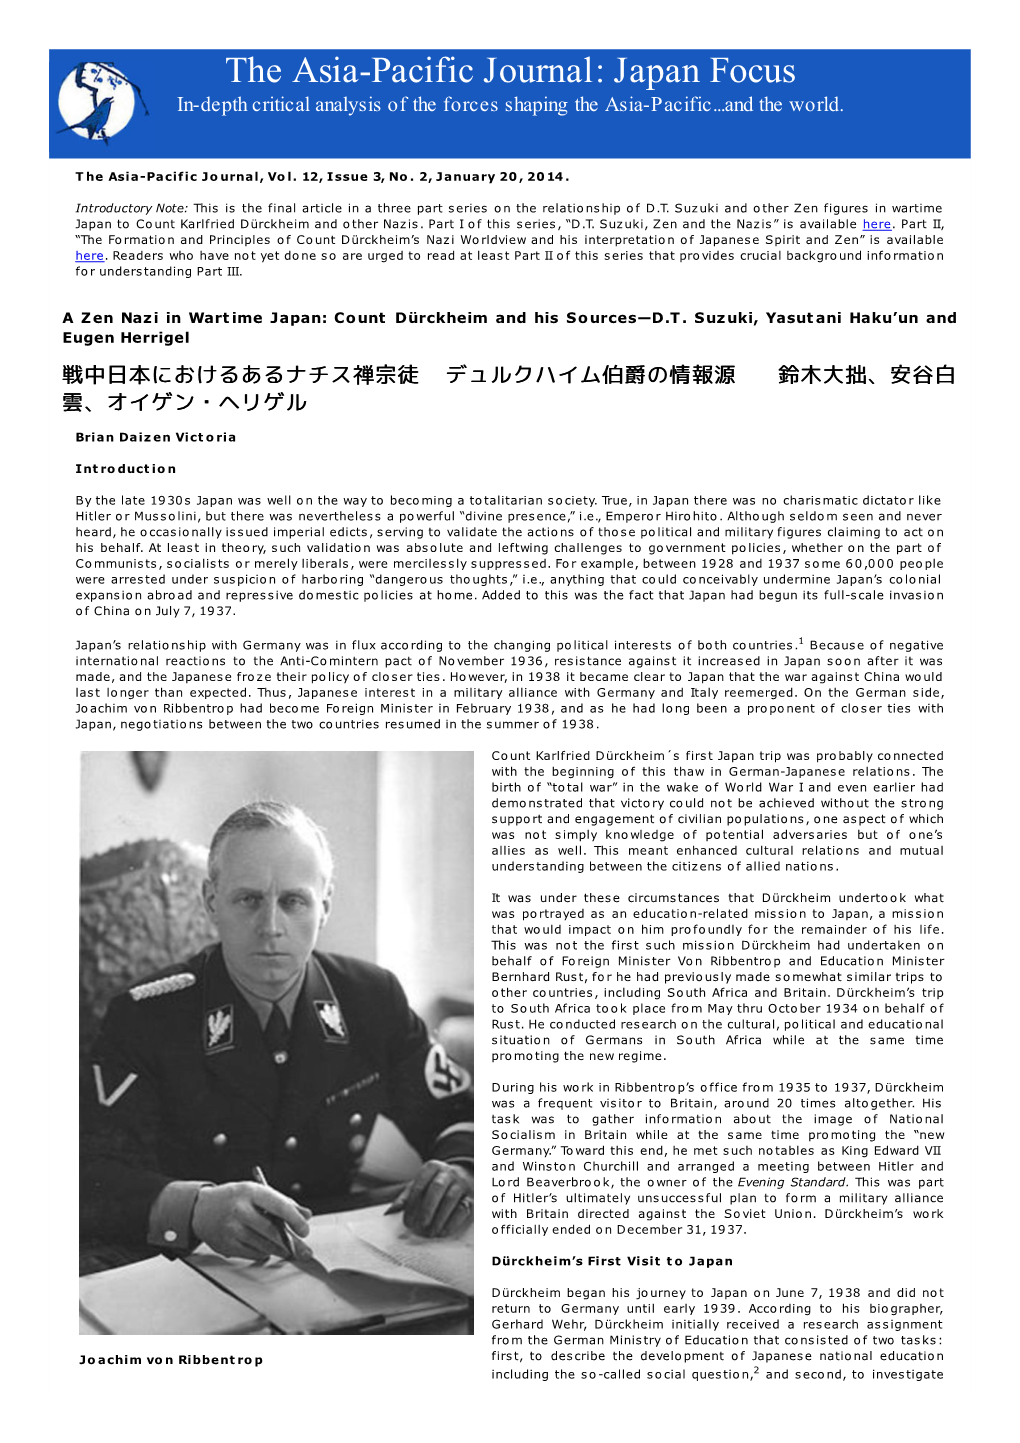 The Asia-Pacific Journal: Japan Focus In-Depth Critical Analysis of the Forces Shaping the Asia-Pacific...And the World